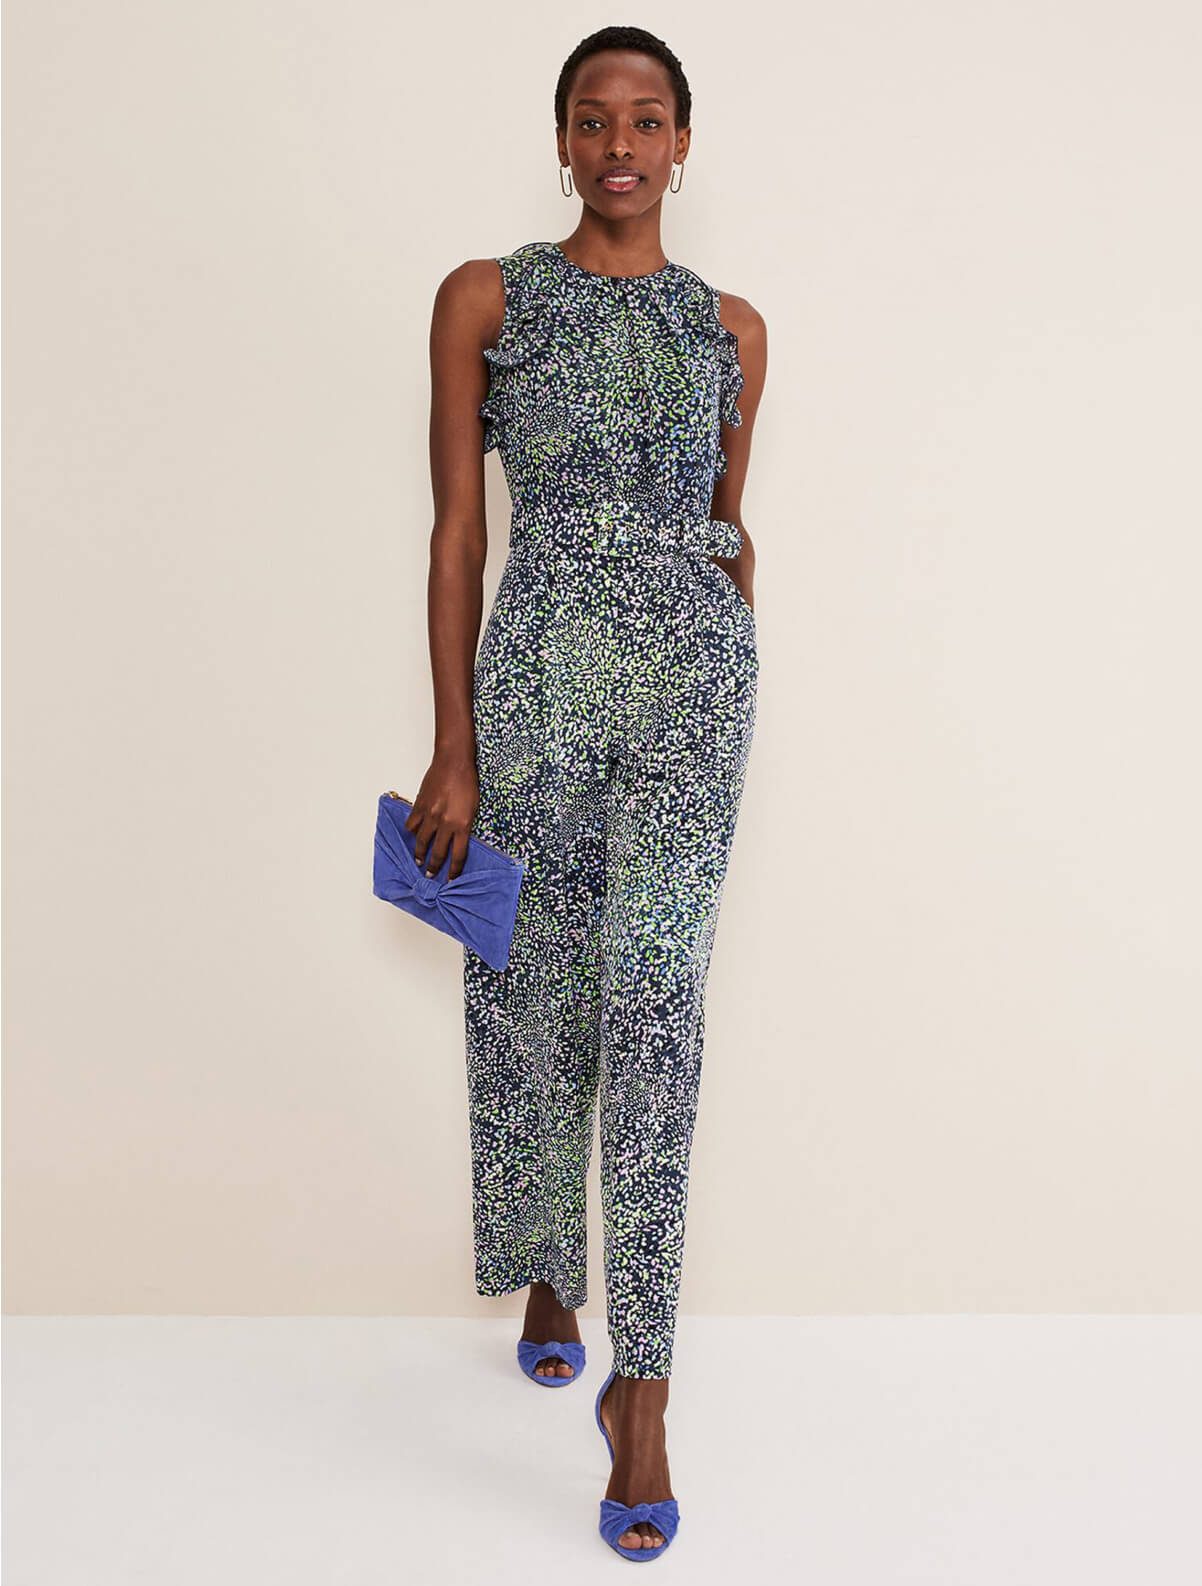 Woman wearing ditsy print jumpsuit